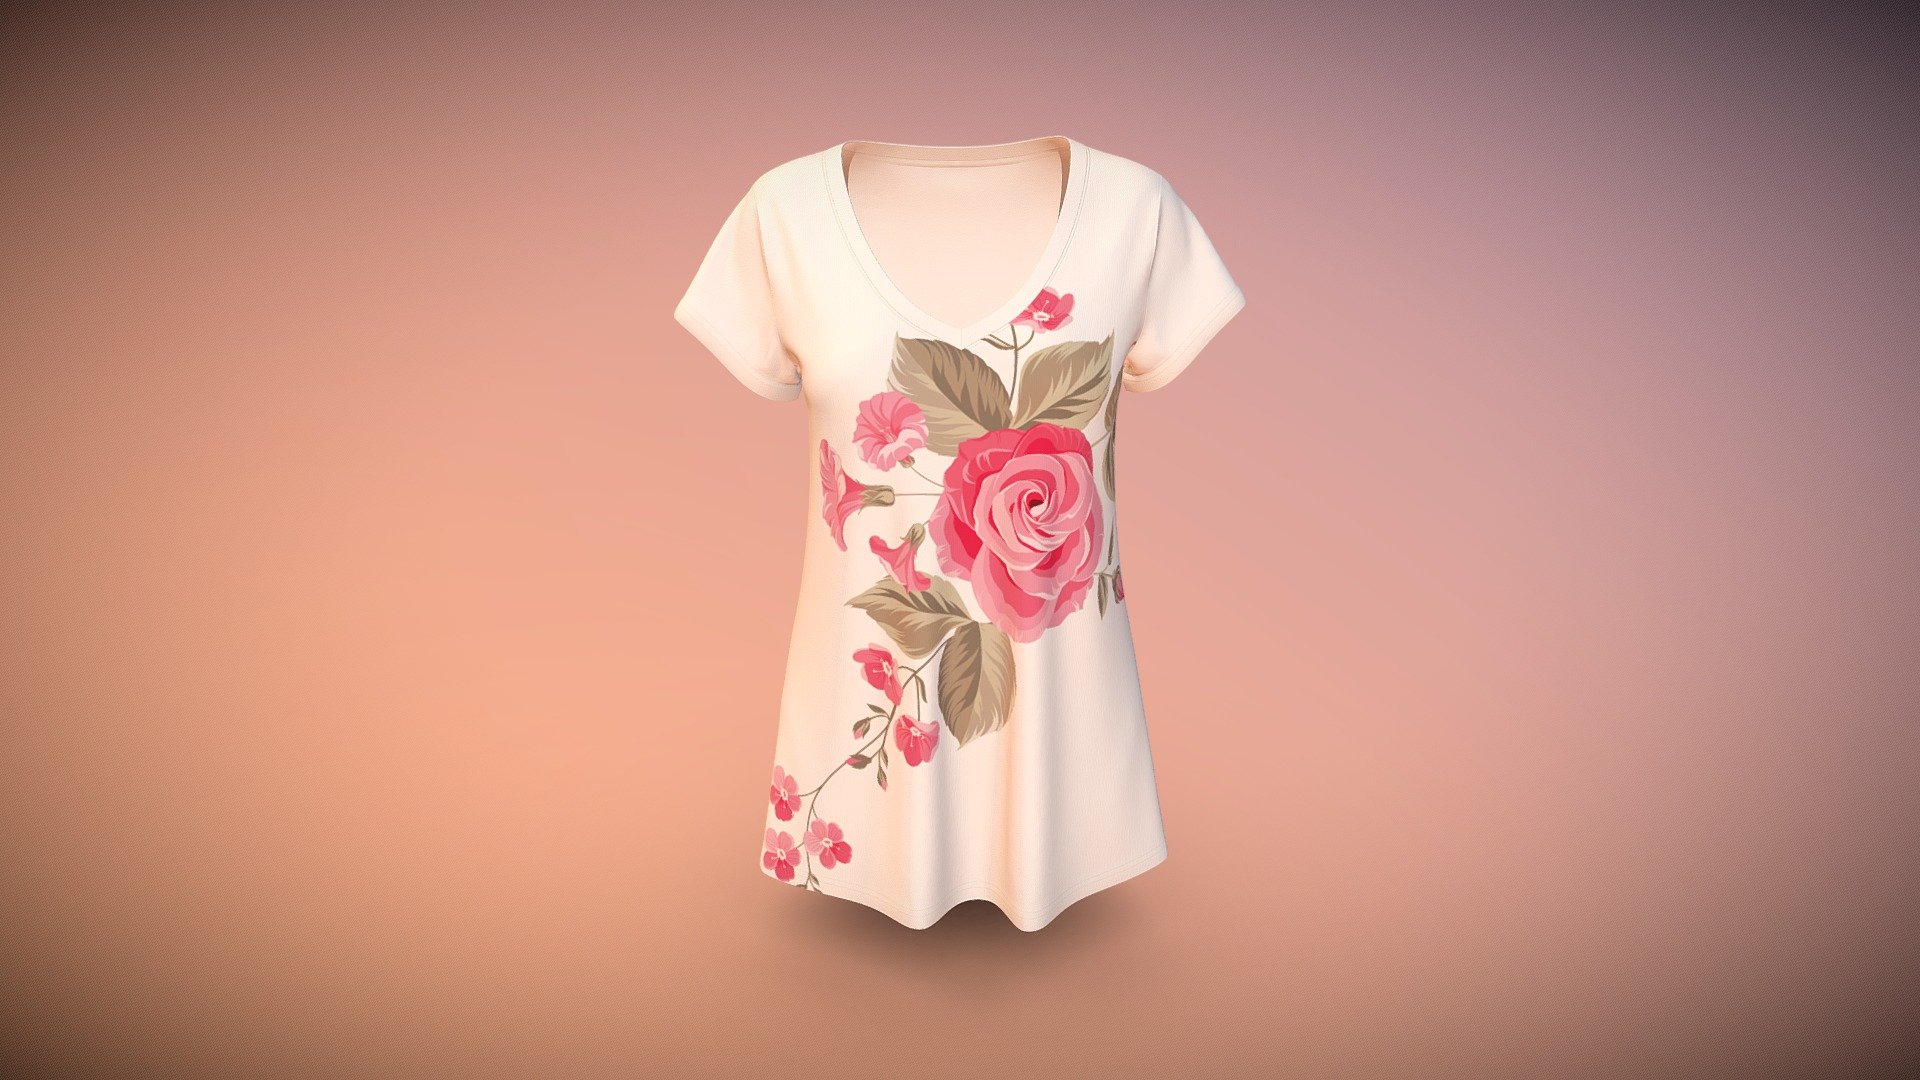 Cloth Title = Boat Neck Soft Touch T-shirt Flower Print 

SKU = DG100123 

Category = Women 

Product Type = Tee 

Cloth Length = Regular 

Body Fit = Relaxed Fit 

Occasion = Casual  

Sleeve Style = Short Sleeve 


Our Services:

3D Apparel Design.

OBJ,FBX,GLTF Making with High/Low Poly.

Fabric Digitalization.

Mockup making.

3D Teck Pack.

Pattern Making.

2D Illustration.

Cloth Animation and 360 Spin Video.


Contact us:- 

Email: info@digitalfashionwear.com 

Website: https://digitalfashionwear.com 


We designed all the types of cloth specially focused on product visualization, e-commerce, fitting, and production. 

We will design: 

T-shirts 

Polo shirts 

Hoodies 

Sweatshirt 

Jackets 

Shirts 

TankTops 

Trousers 

Bras 

Underwear 

Blazer 

Aprons 

Leggings 

and All Fashion items. 





Our goal is to make sure what we provide you, meets your demand 3d model